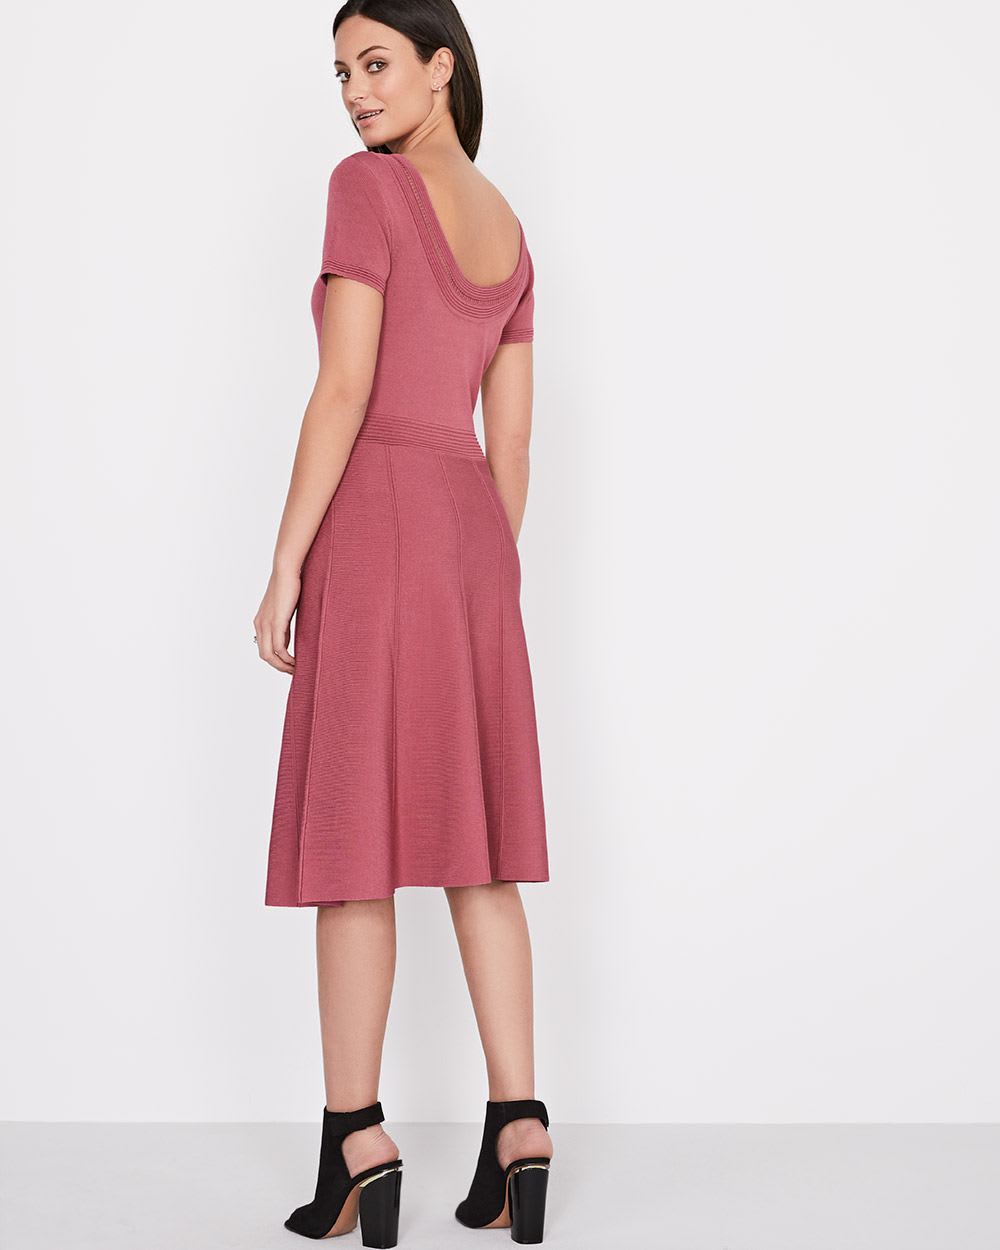 Midi Sweater Dress with plunging back | RW&CO.